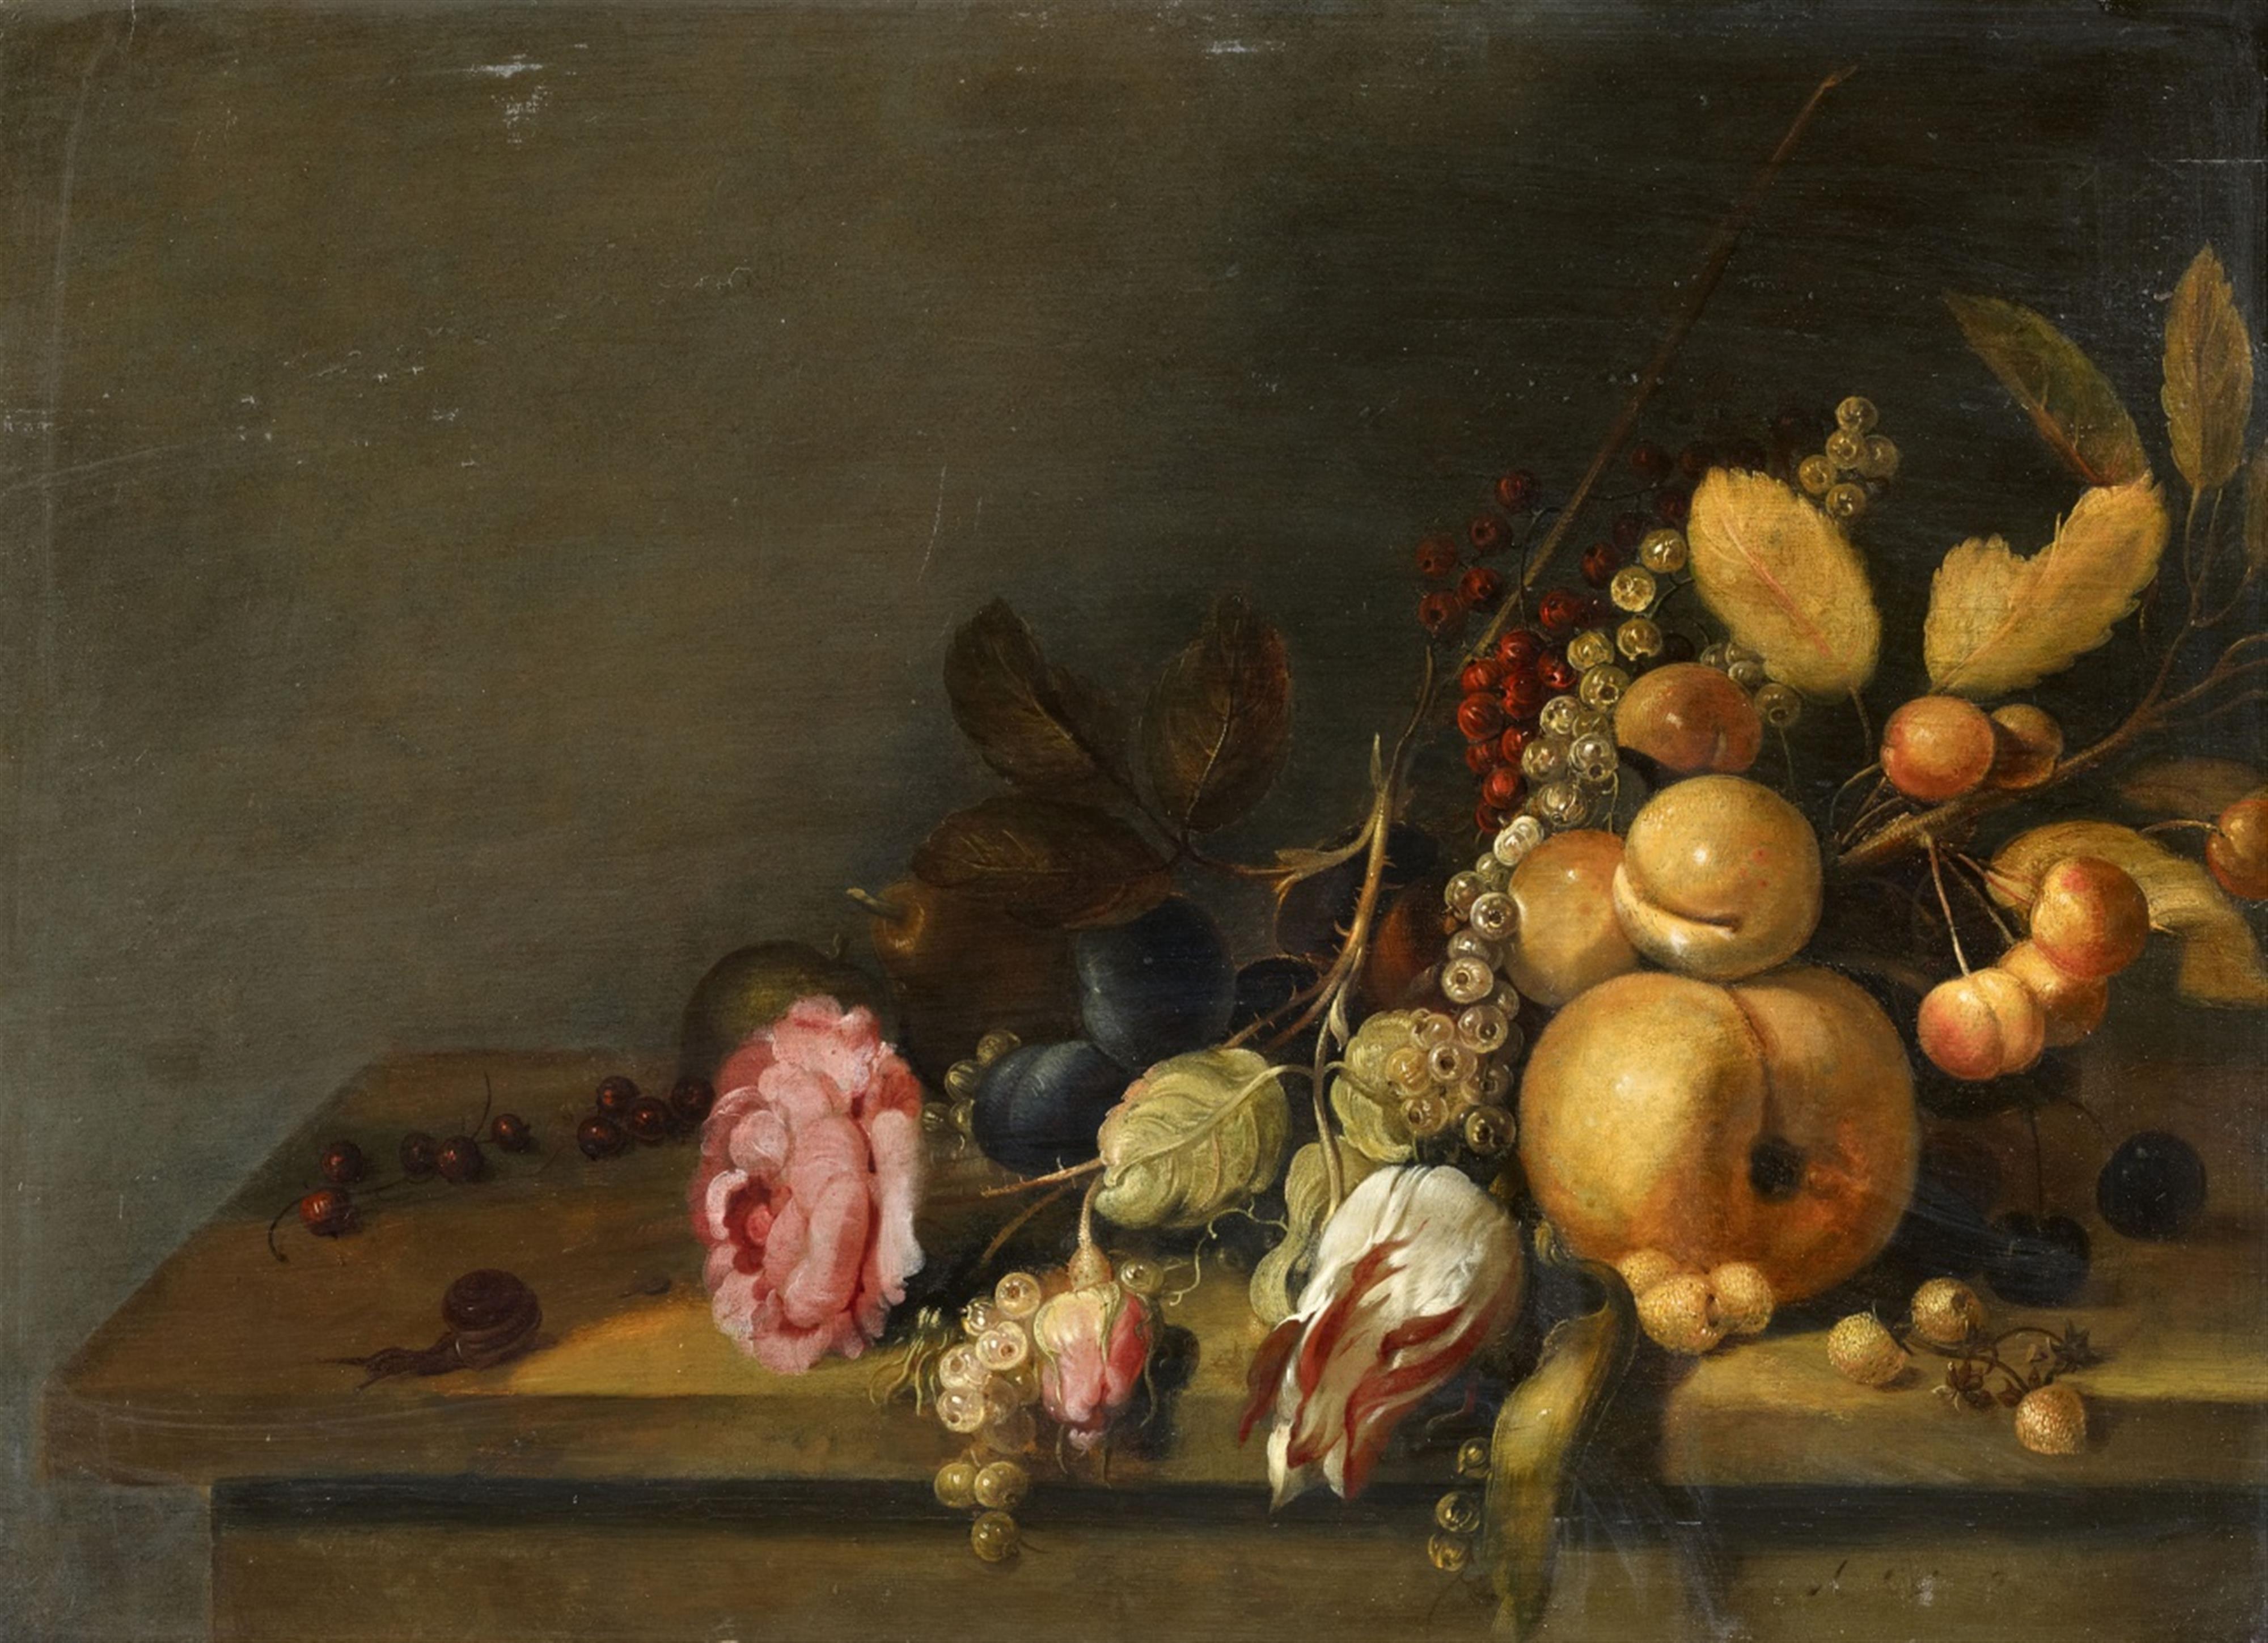 Hans Bollinger, attributed to - Still Life with Roses and Fruit on a Table - image-1